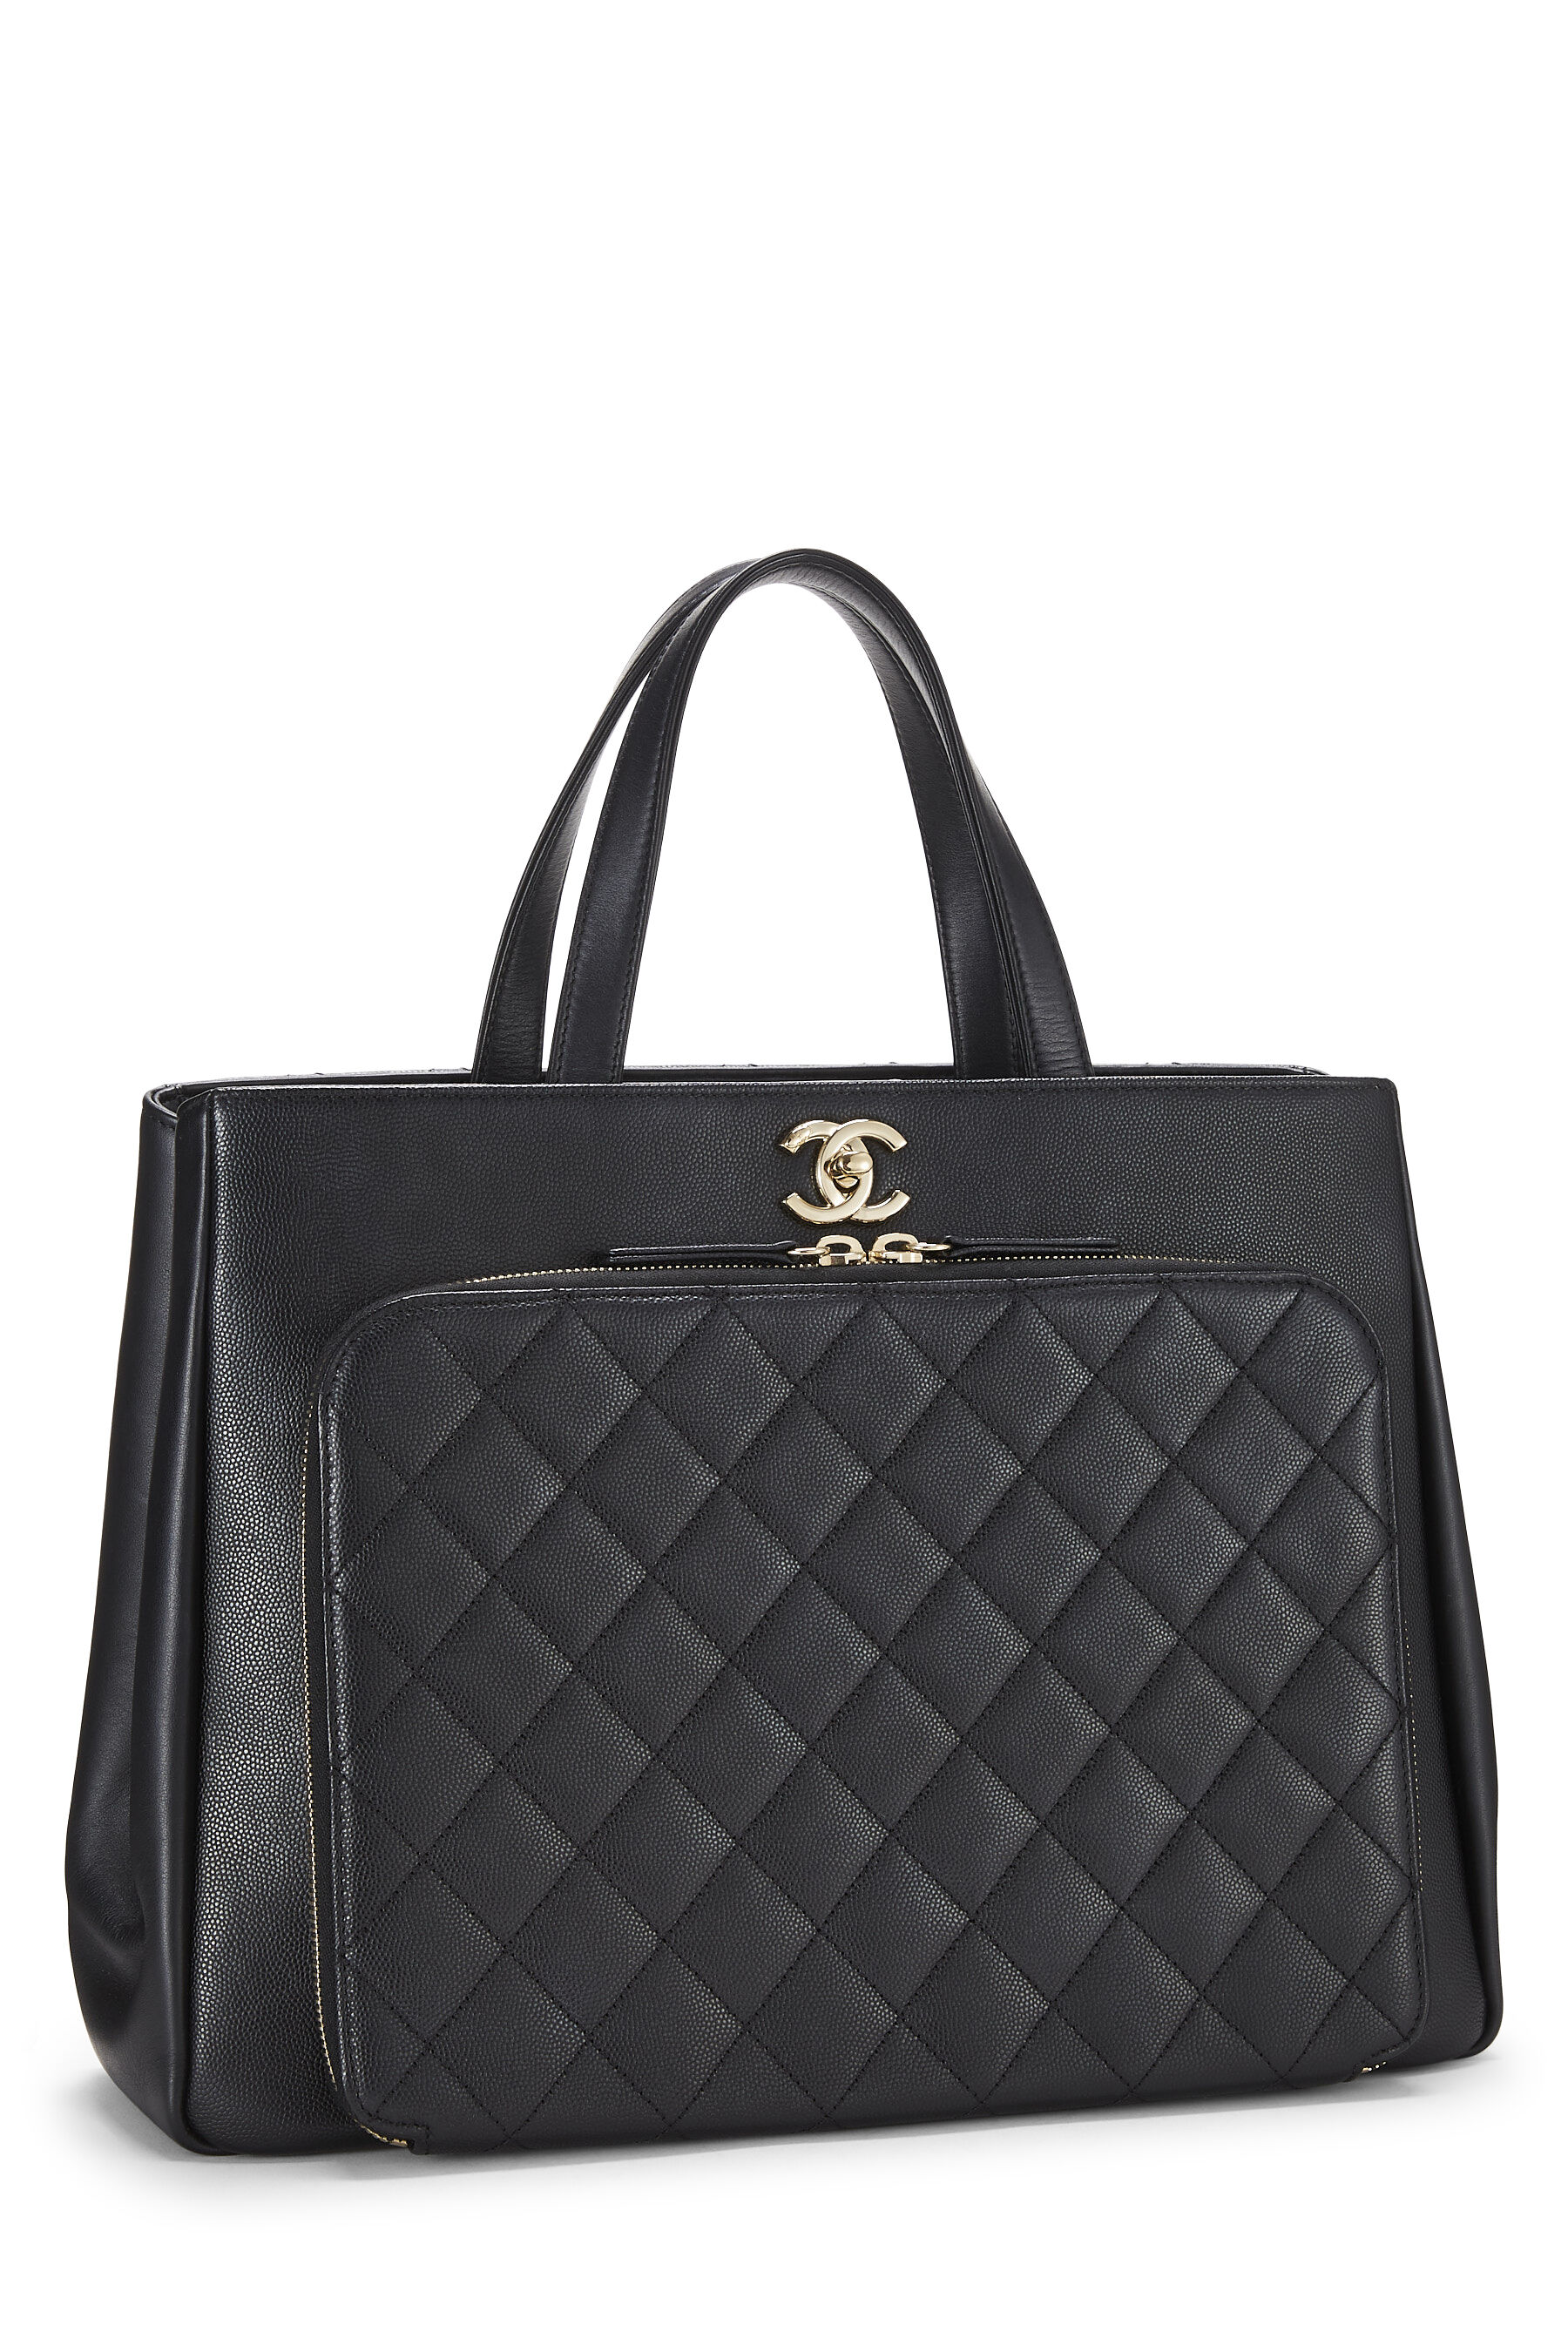 Chanel Small Business Affinity Flap Bag Black Caviar Gold Hardware